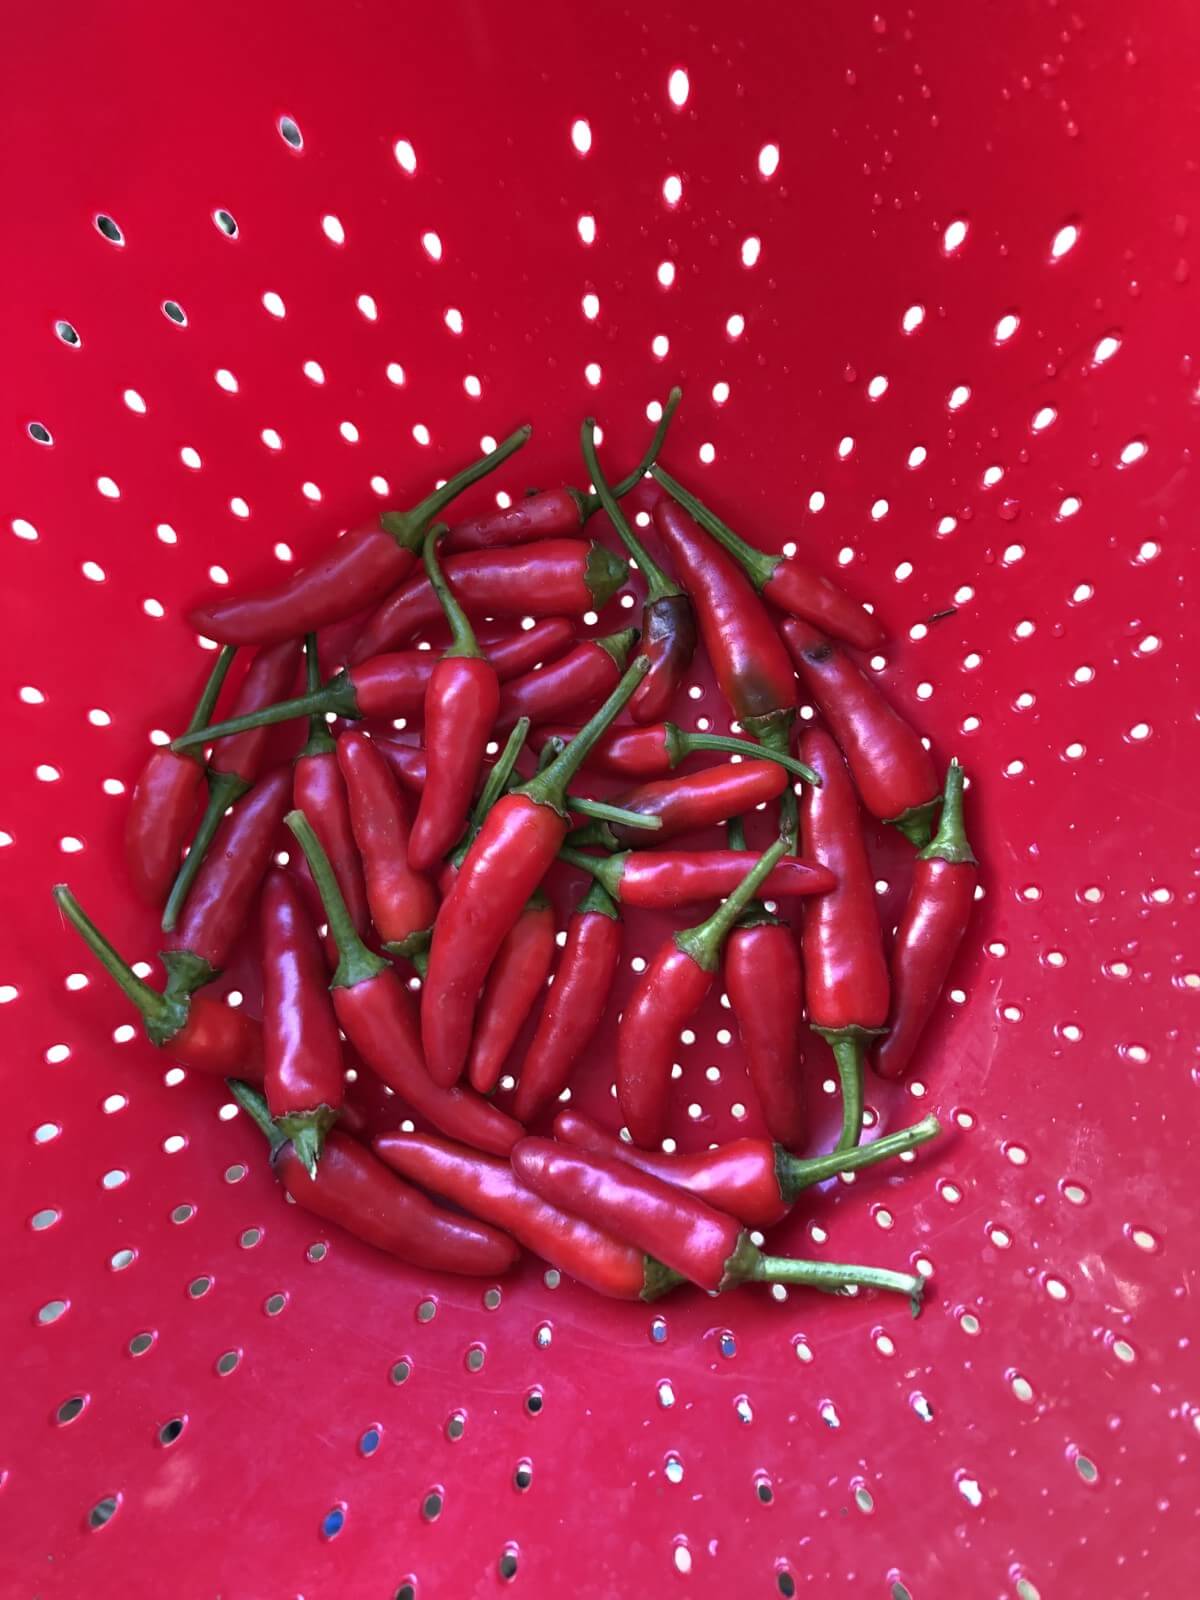 red chili peppers in a red colander with light shining through